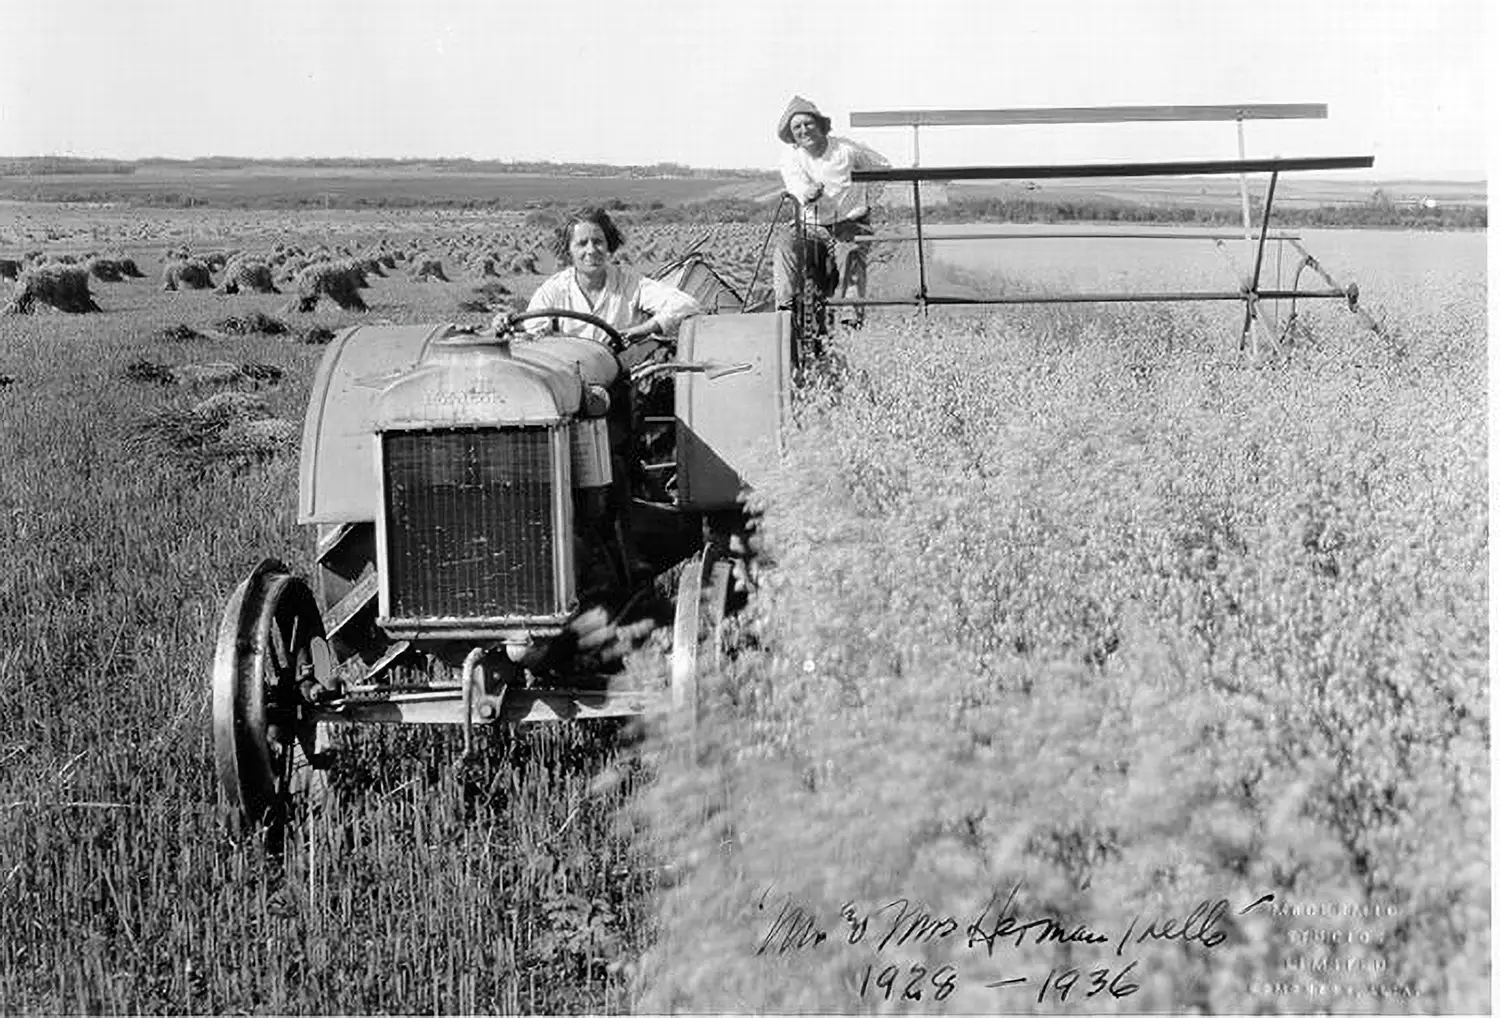 A woman drives a tractor. A man sits beside her, riding on an attached device that harvests the field.